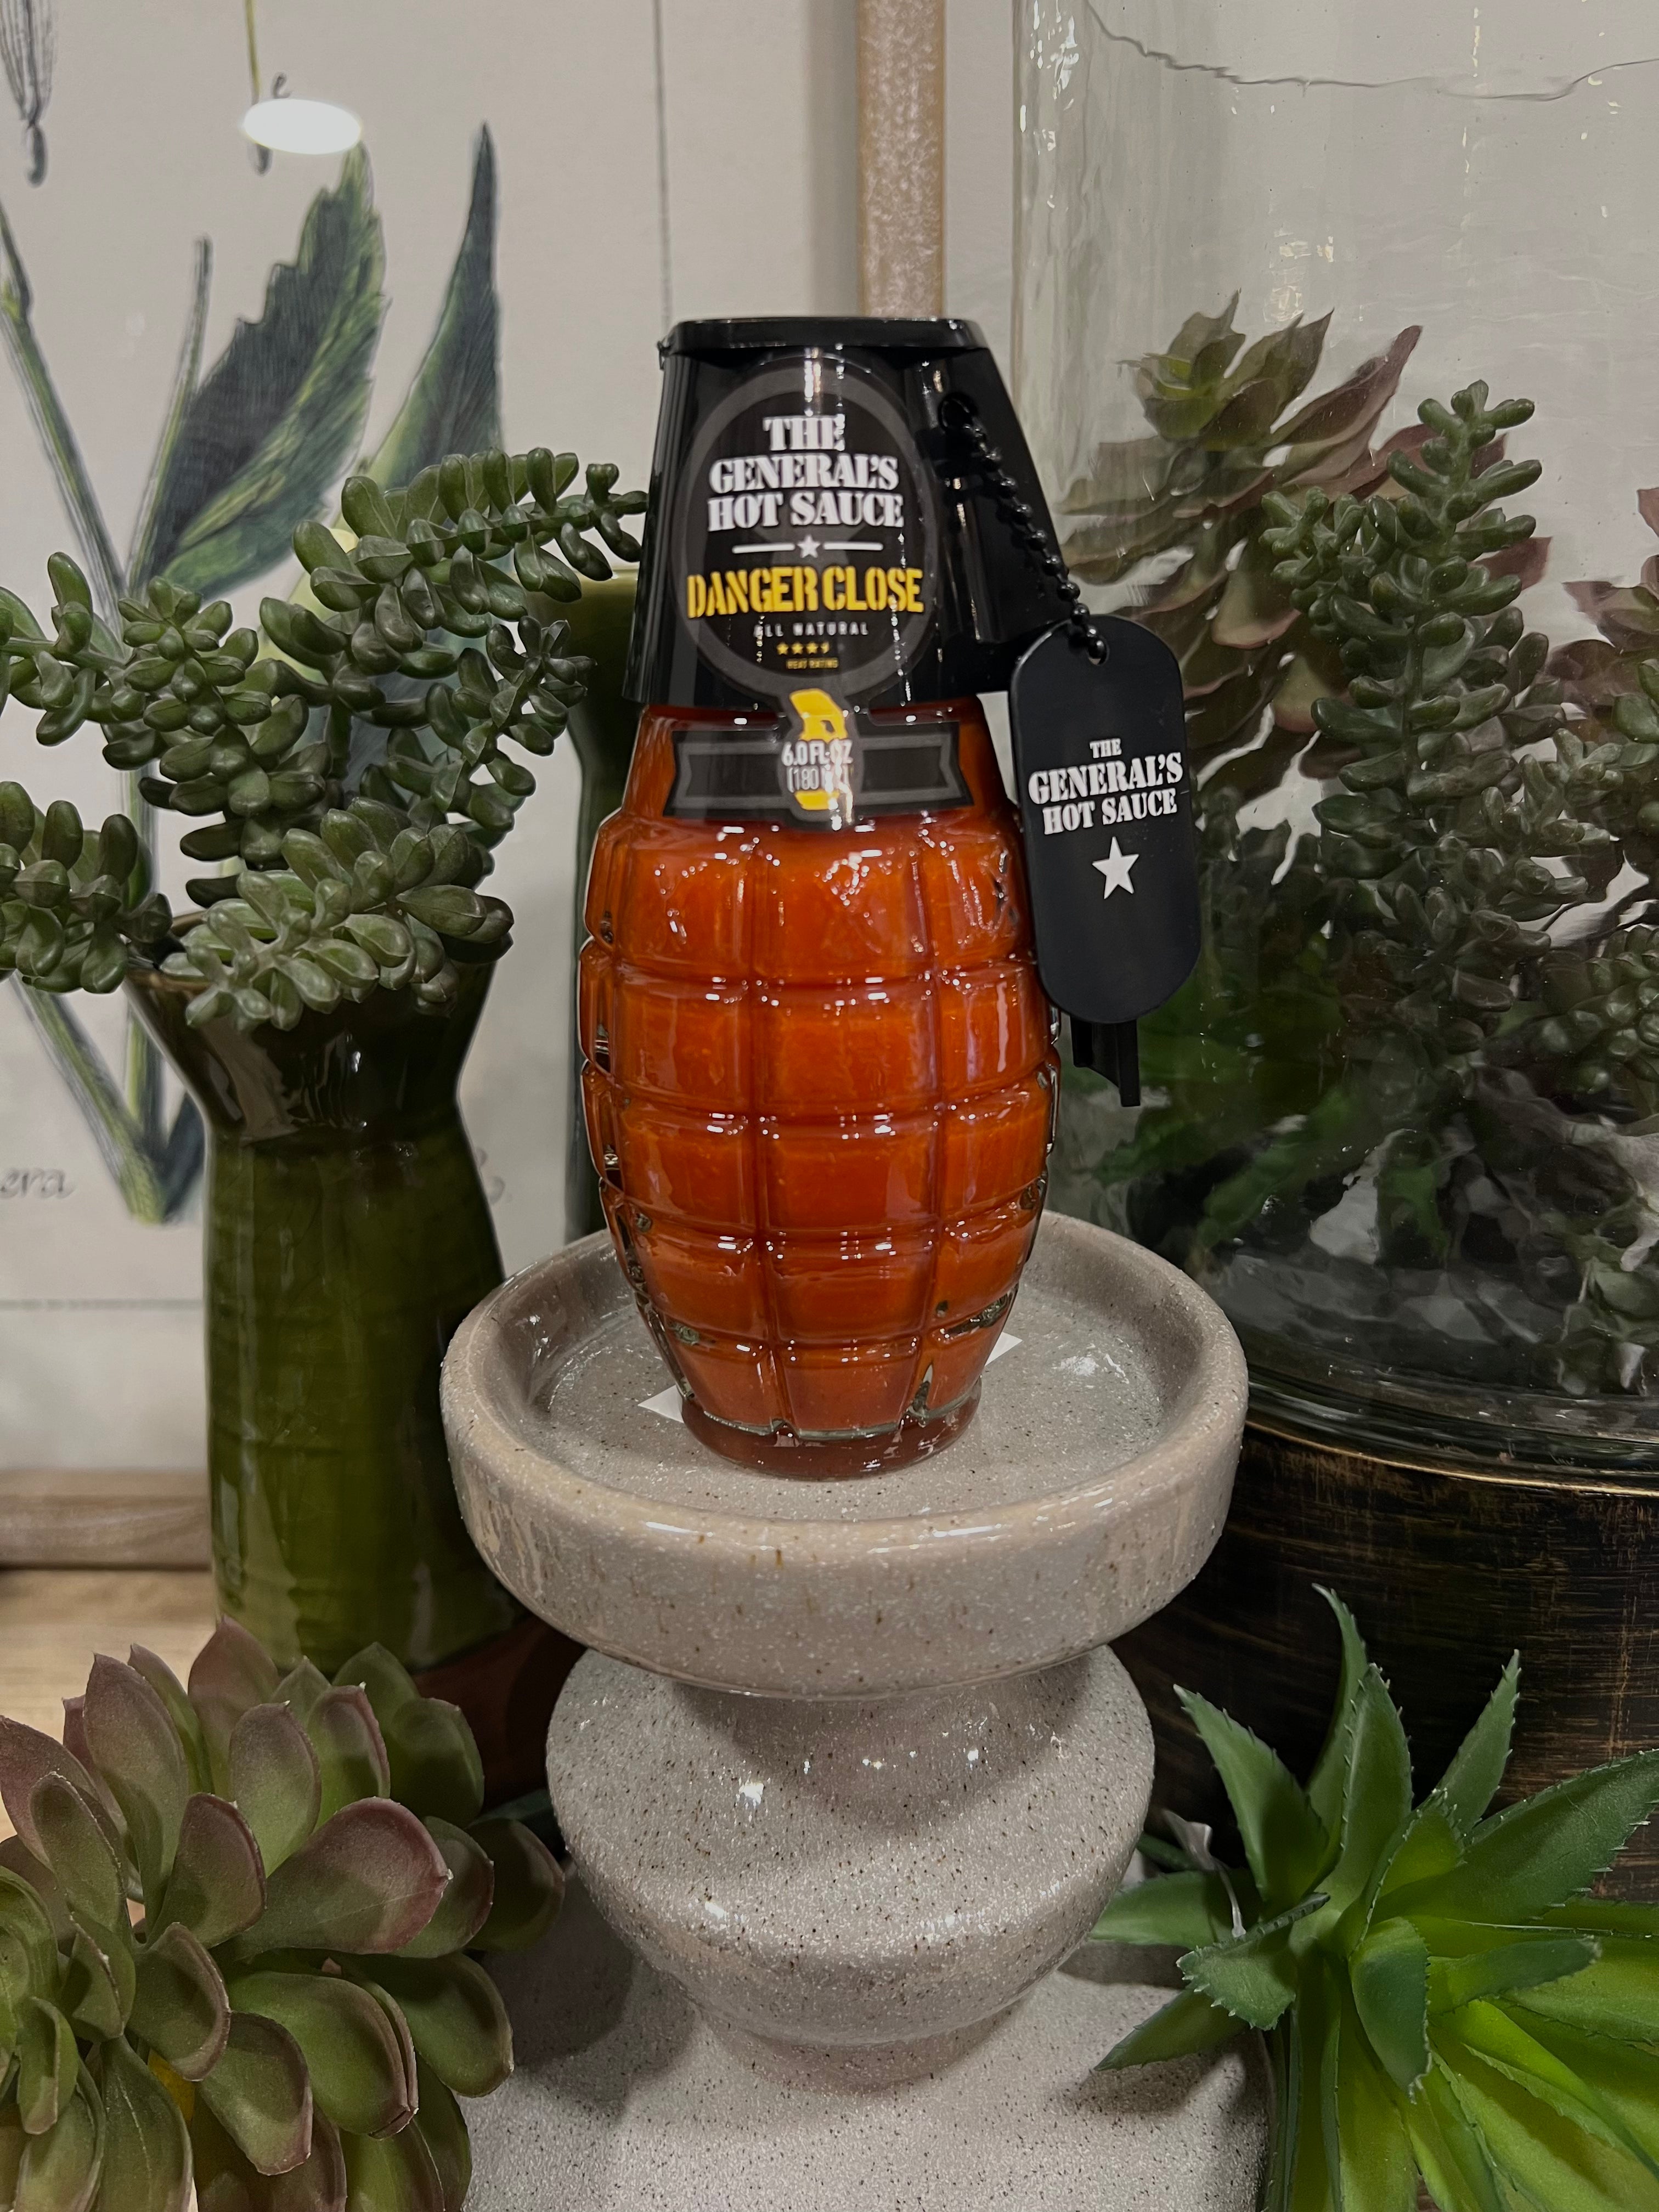 The General's Hot sauce